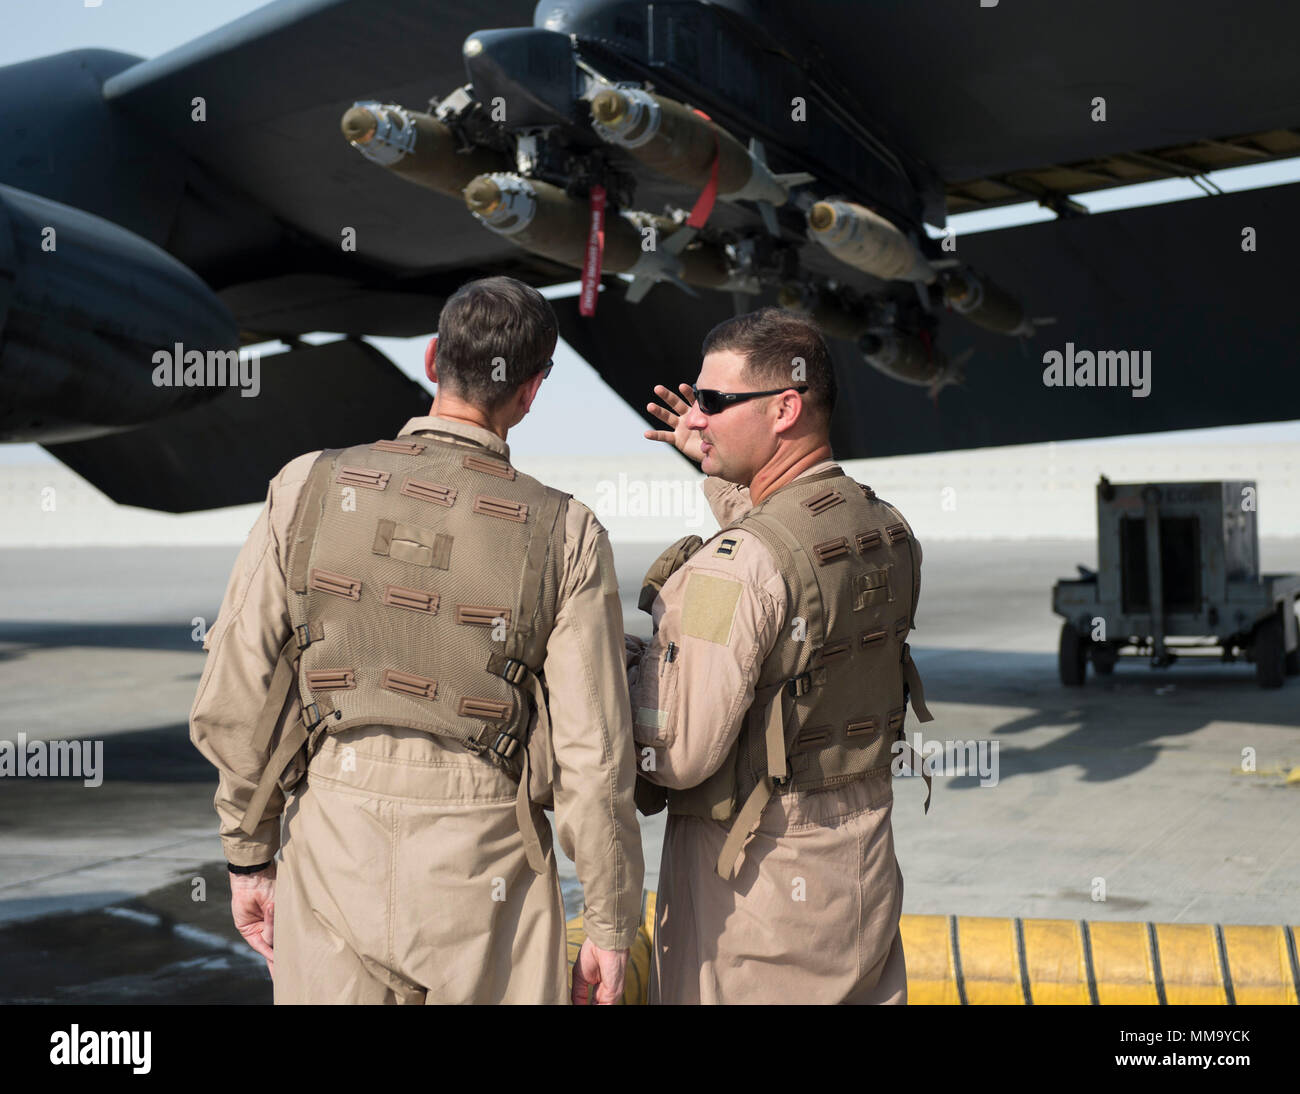 U.S. Air Force Capt. Micah McCracken, right, 69th Expeditionary Bomb Squadron aircraft commander, discusses the B-52 Stratofortress to U.S. Army Gen. Joseph Votel, left, U.S. Central Command commander, at Al Udeid Air Base, Qatar, Sept. 8, 2017.  Votel flew on a combat mission aboard a B-52 Stratofortress, and spent time talking with deployed Airmen at the 69th Expeditionary Bomb Squadron here. (U.S. Air Force photo by Tech. Sgt. Amy M. Lovgren) Stock Photo